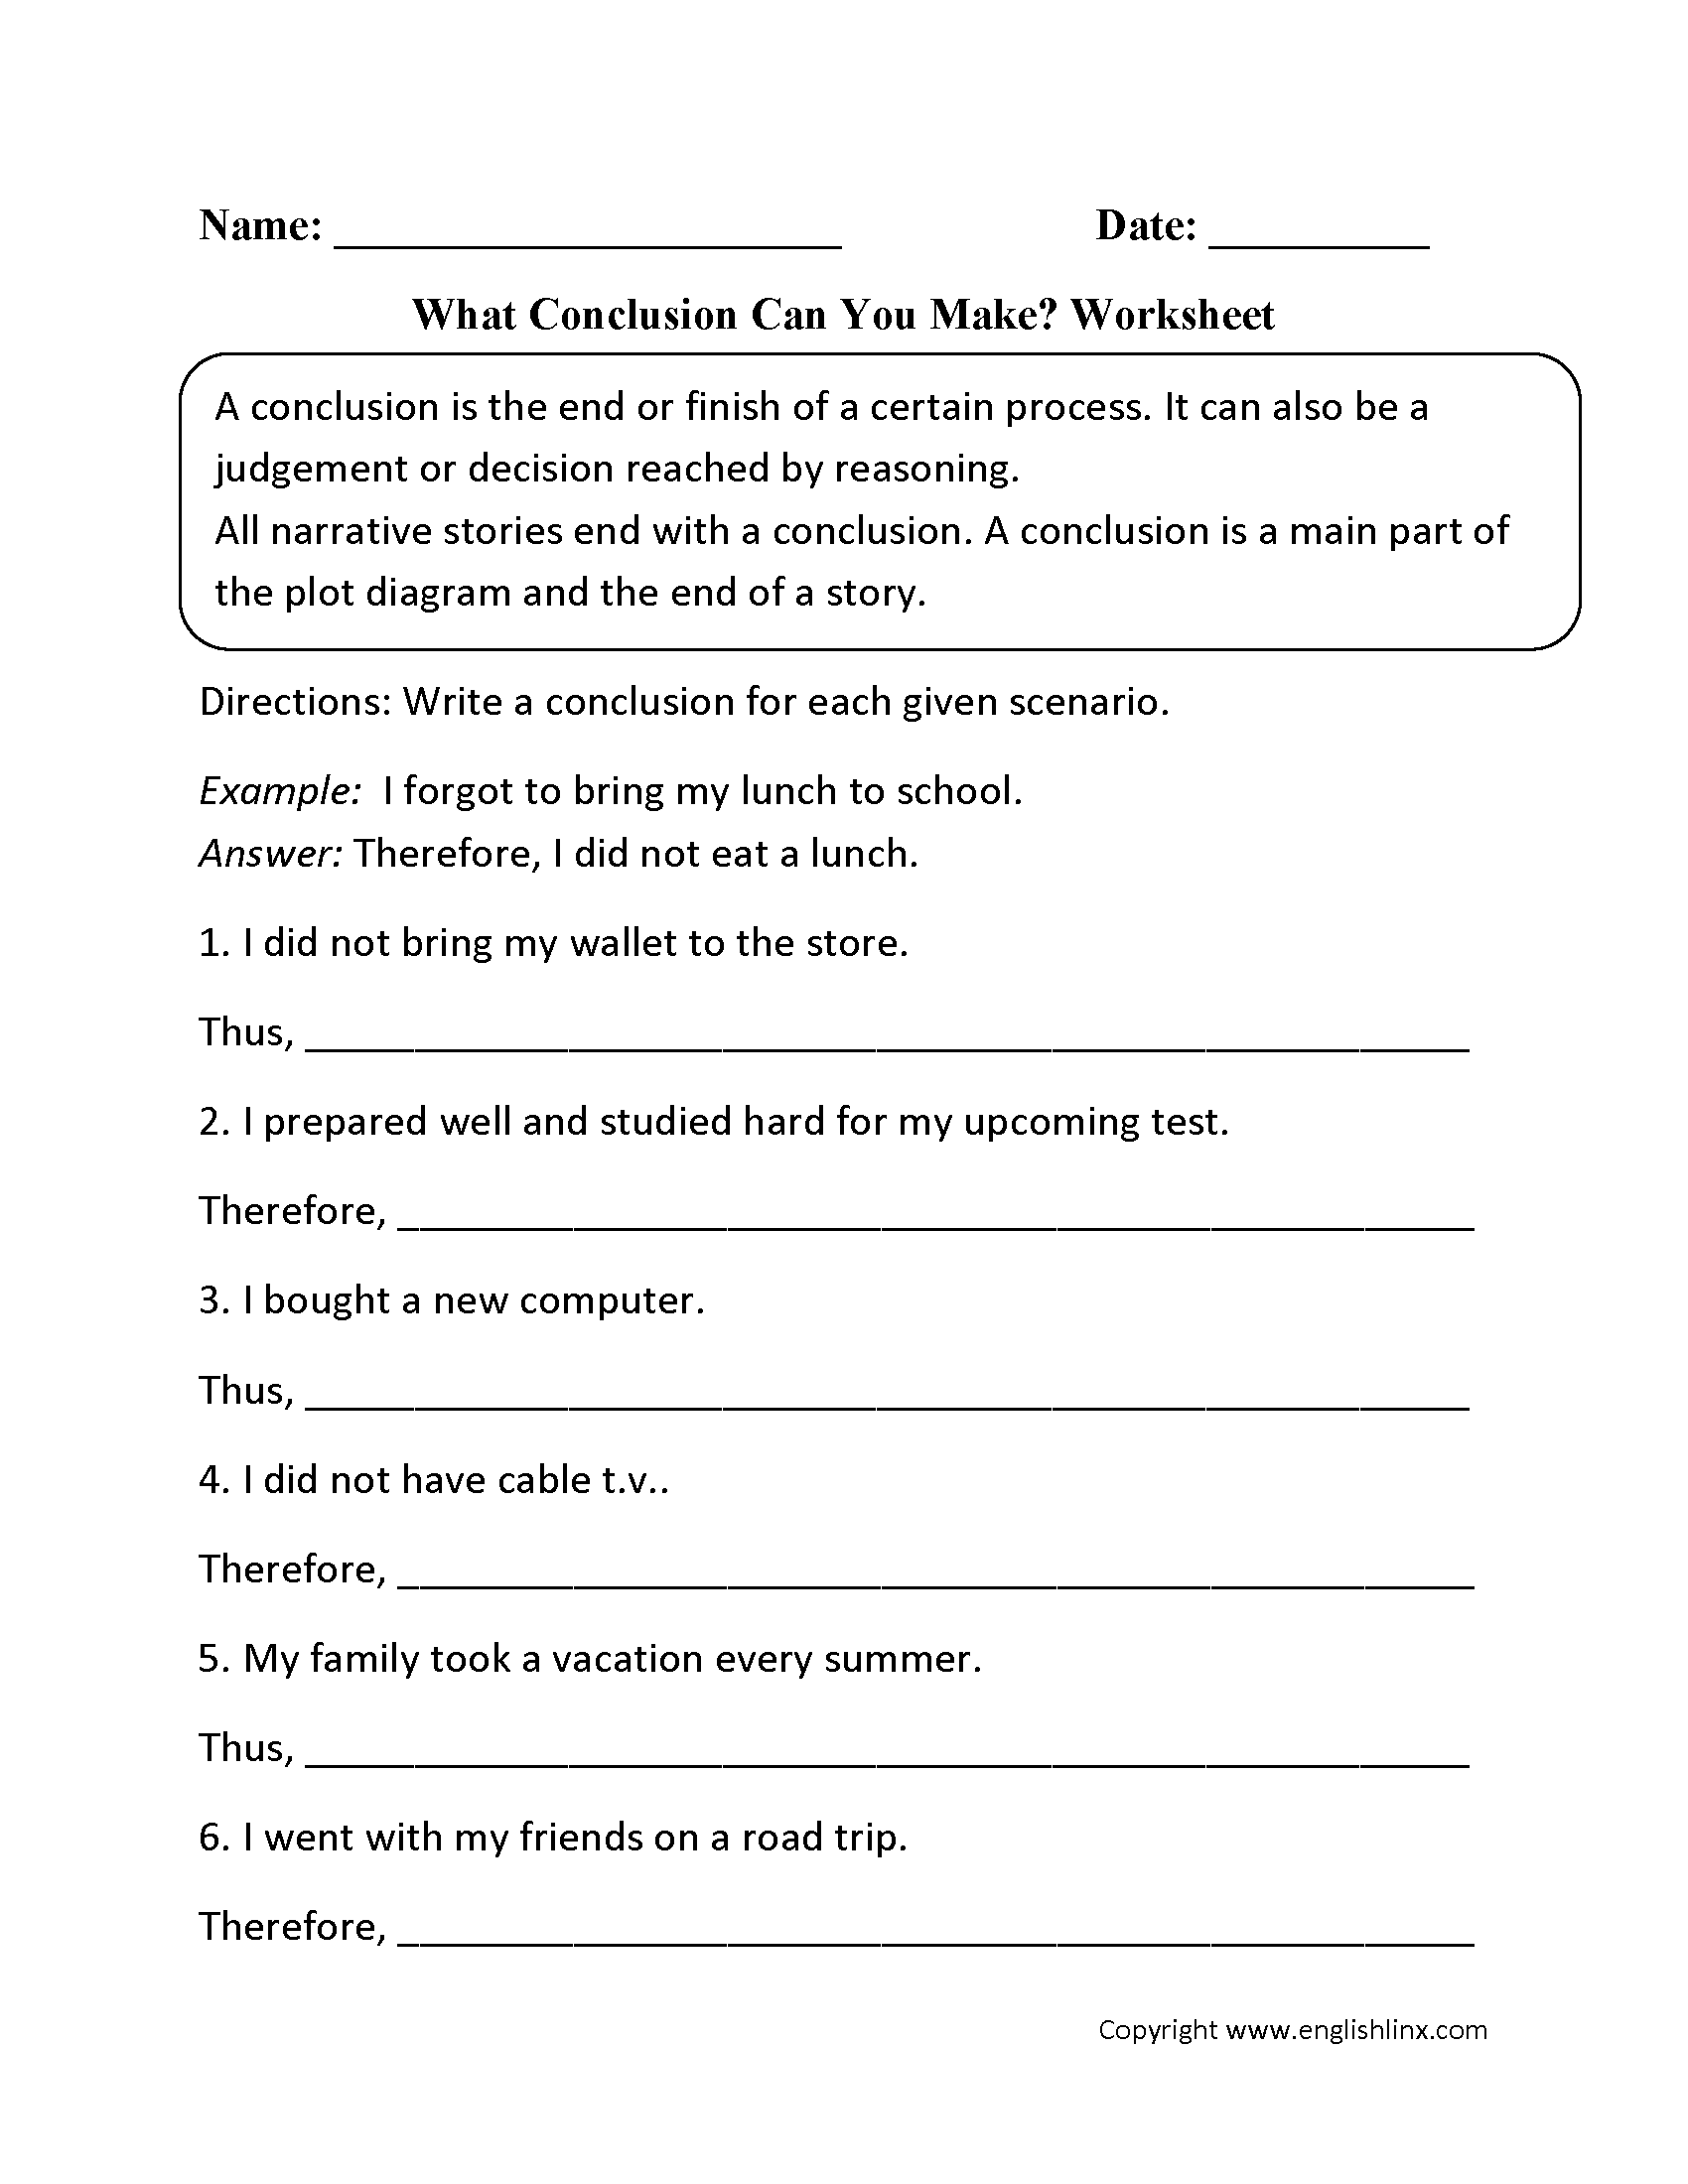 What Conclusion Can you Make? Worksheet